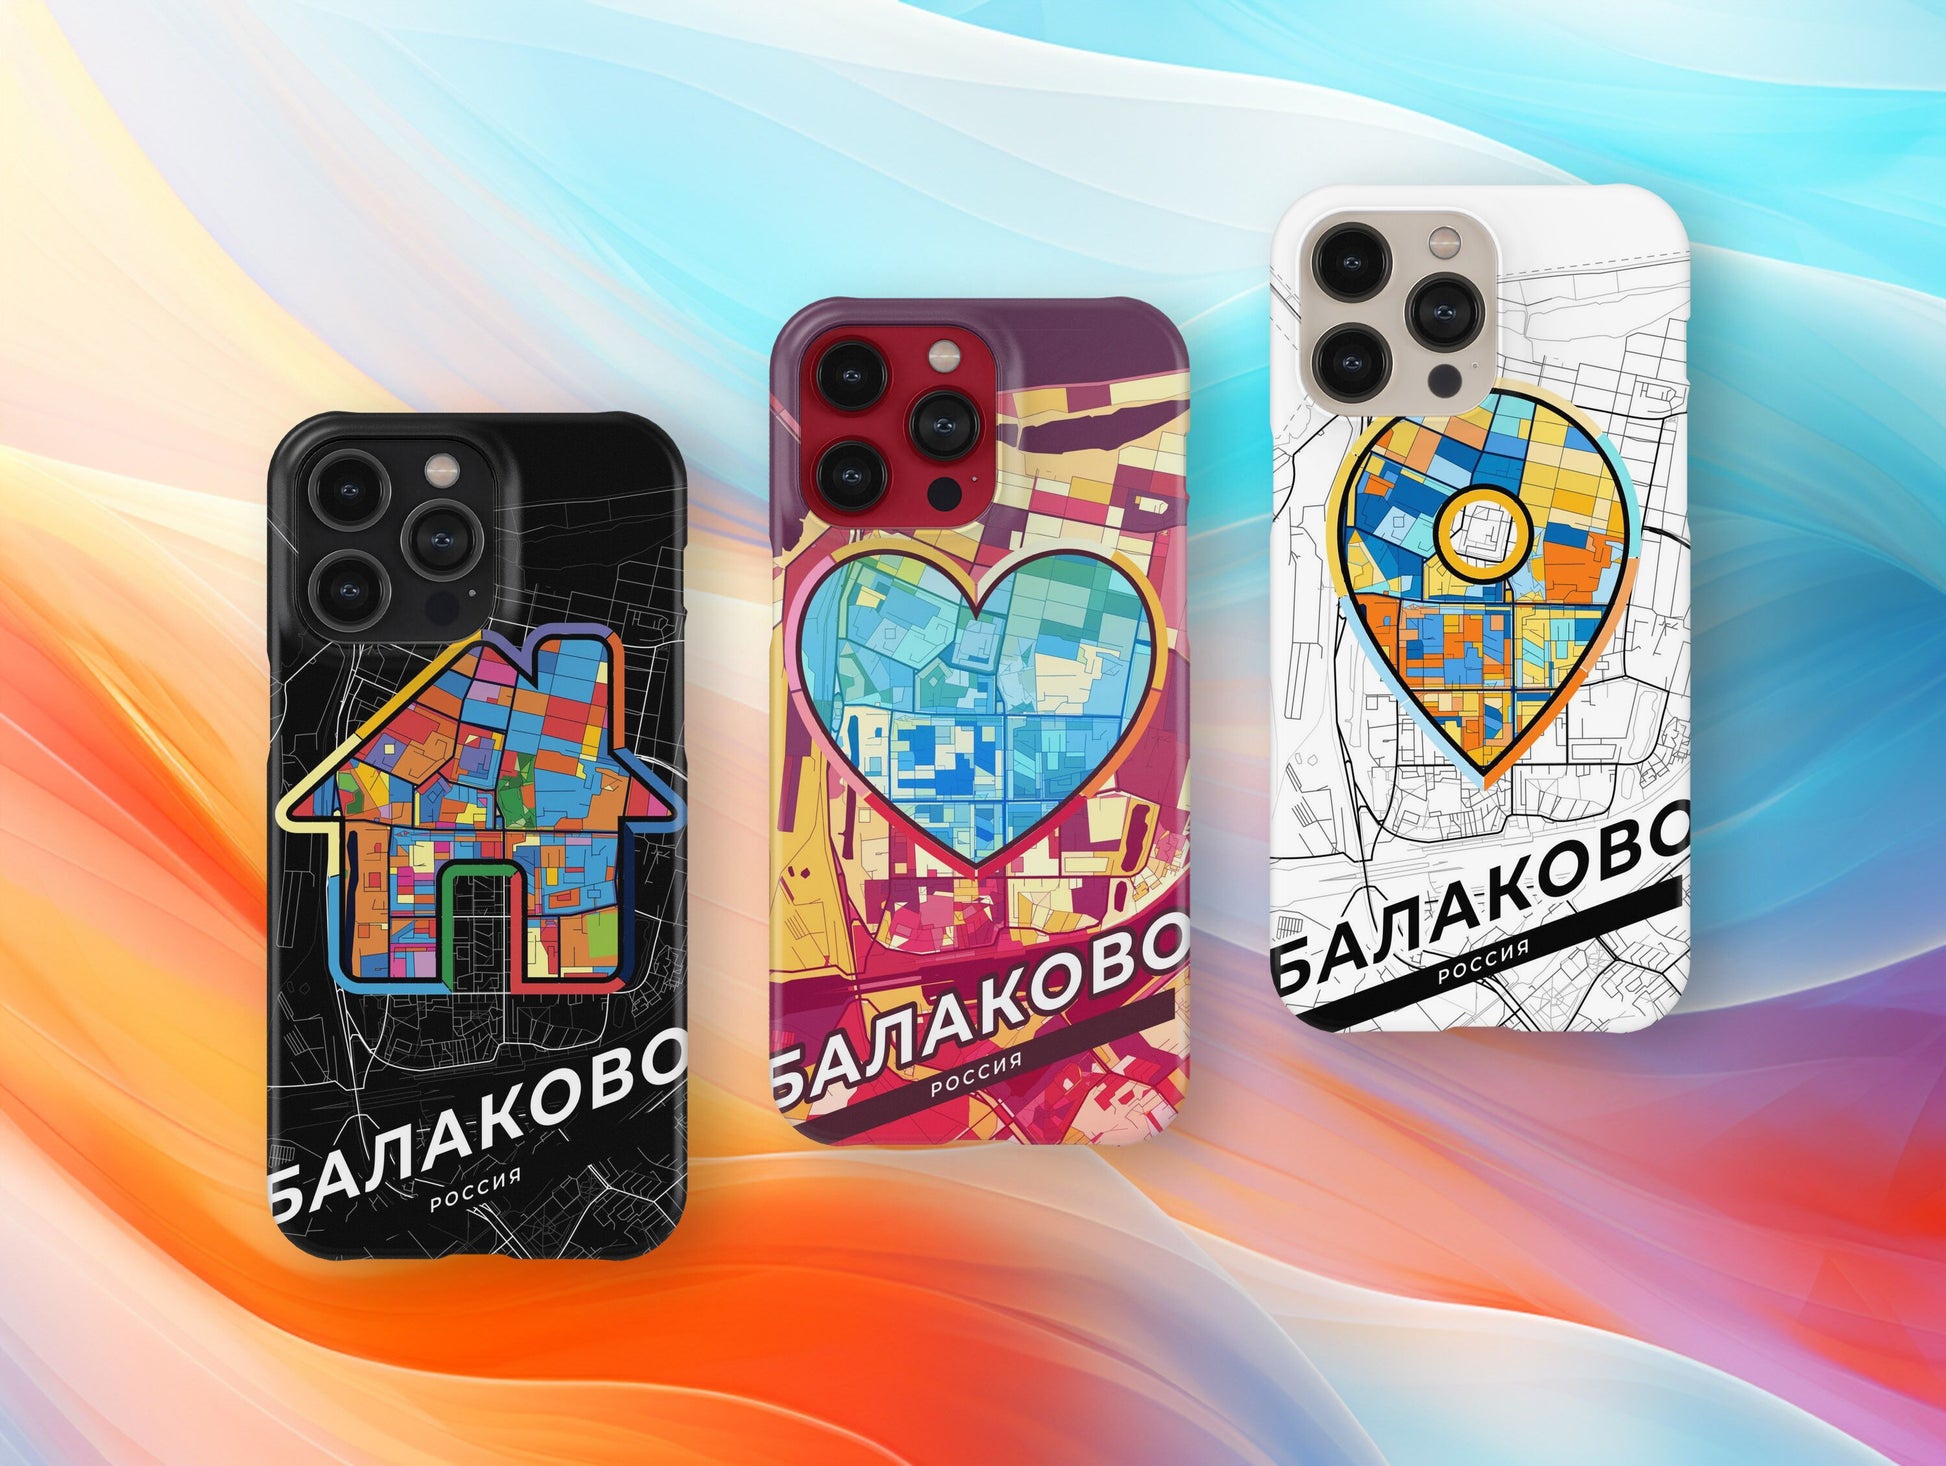 Balakovo Russia slim phone case with colorful icon. Birthday, wedding or housewarming gift. Couple match cases.